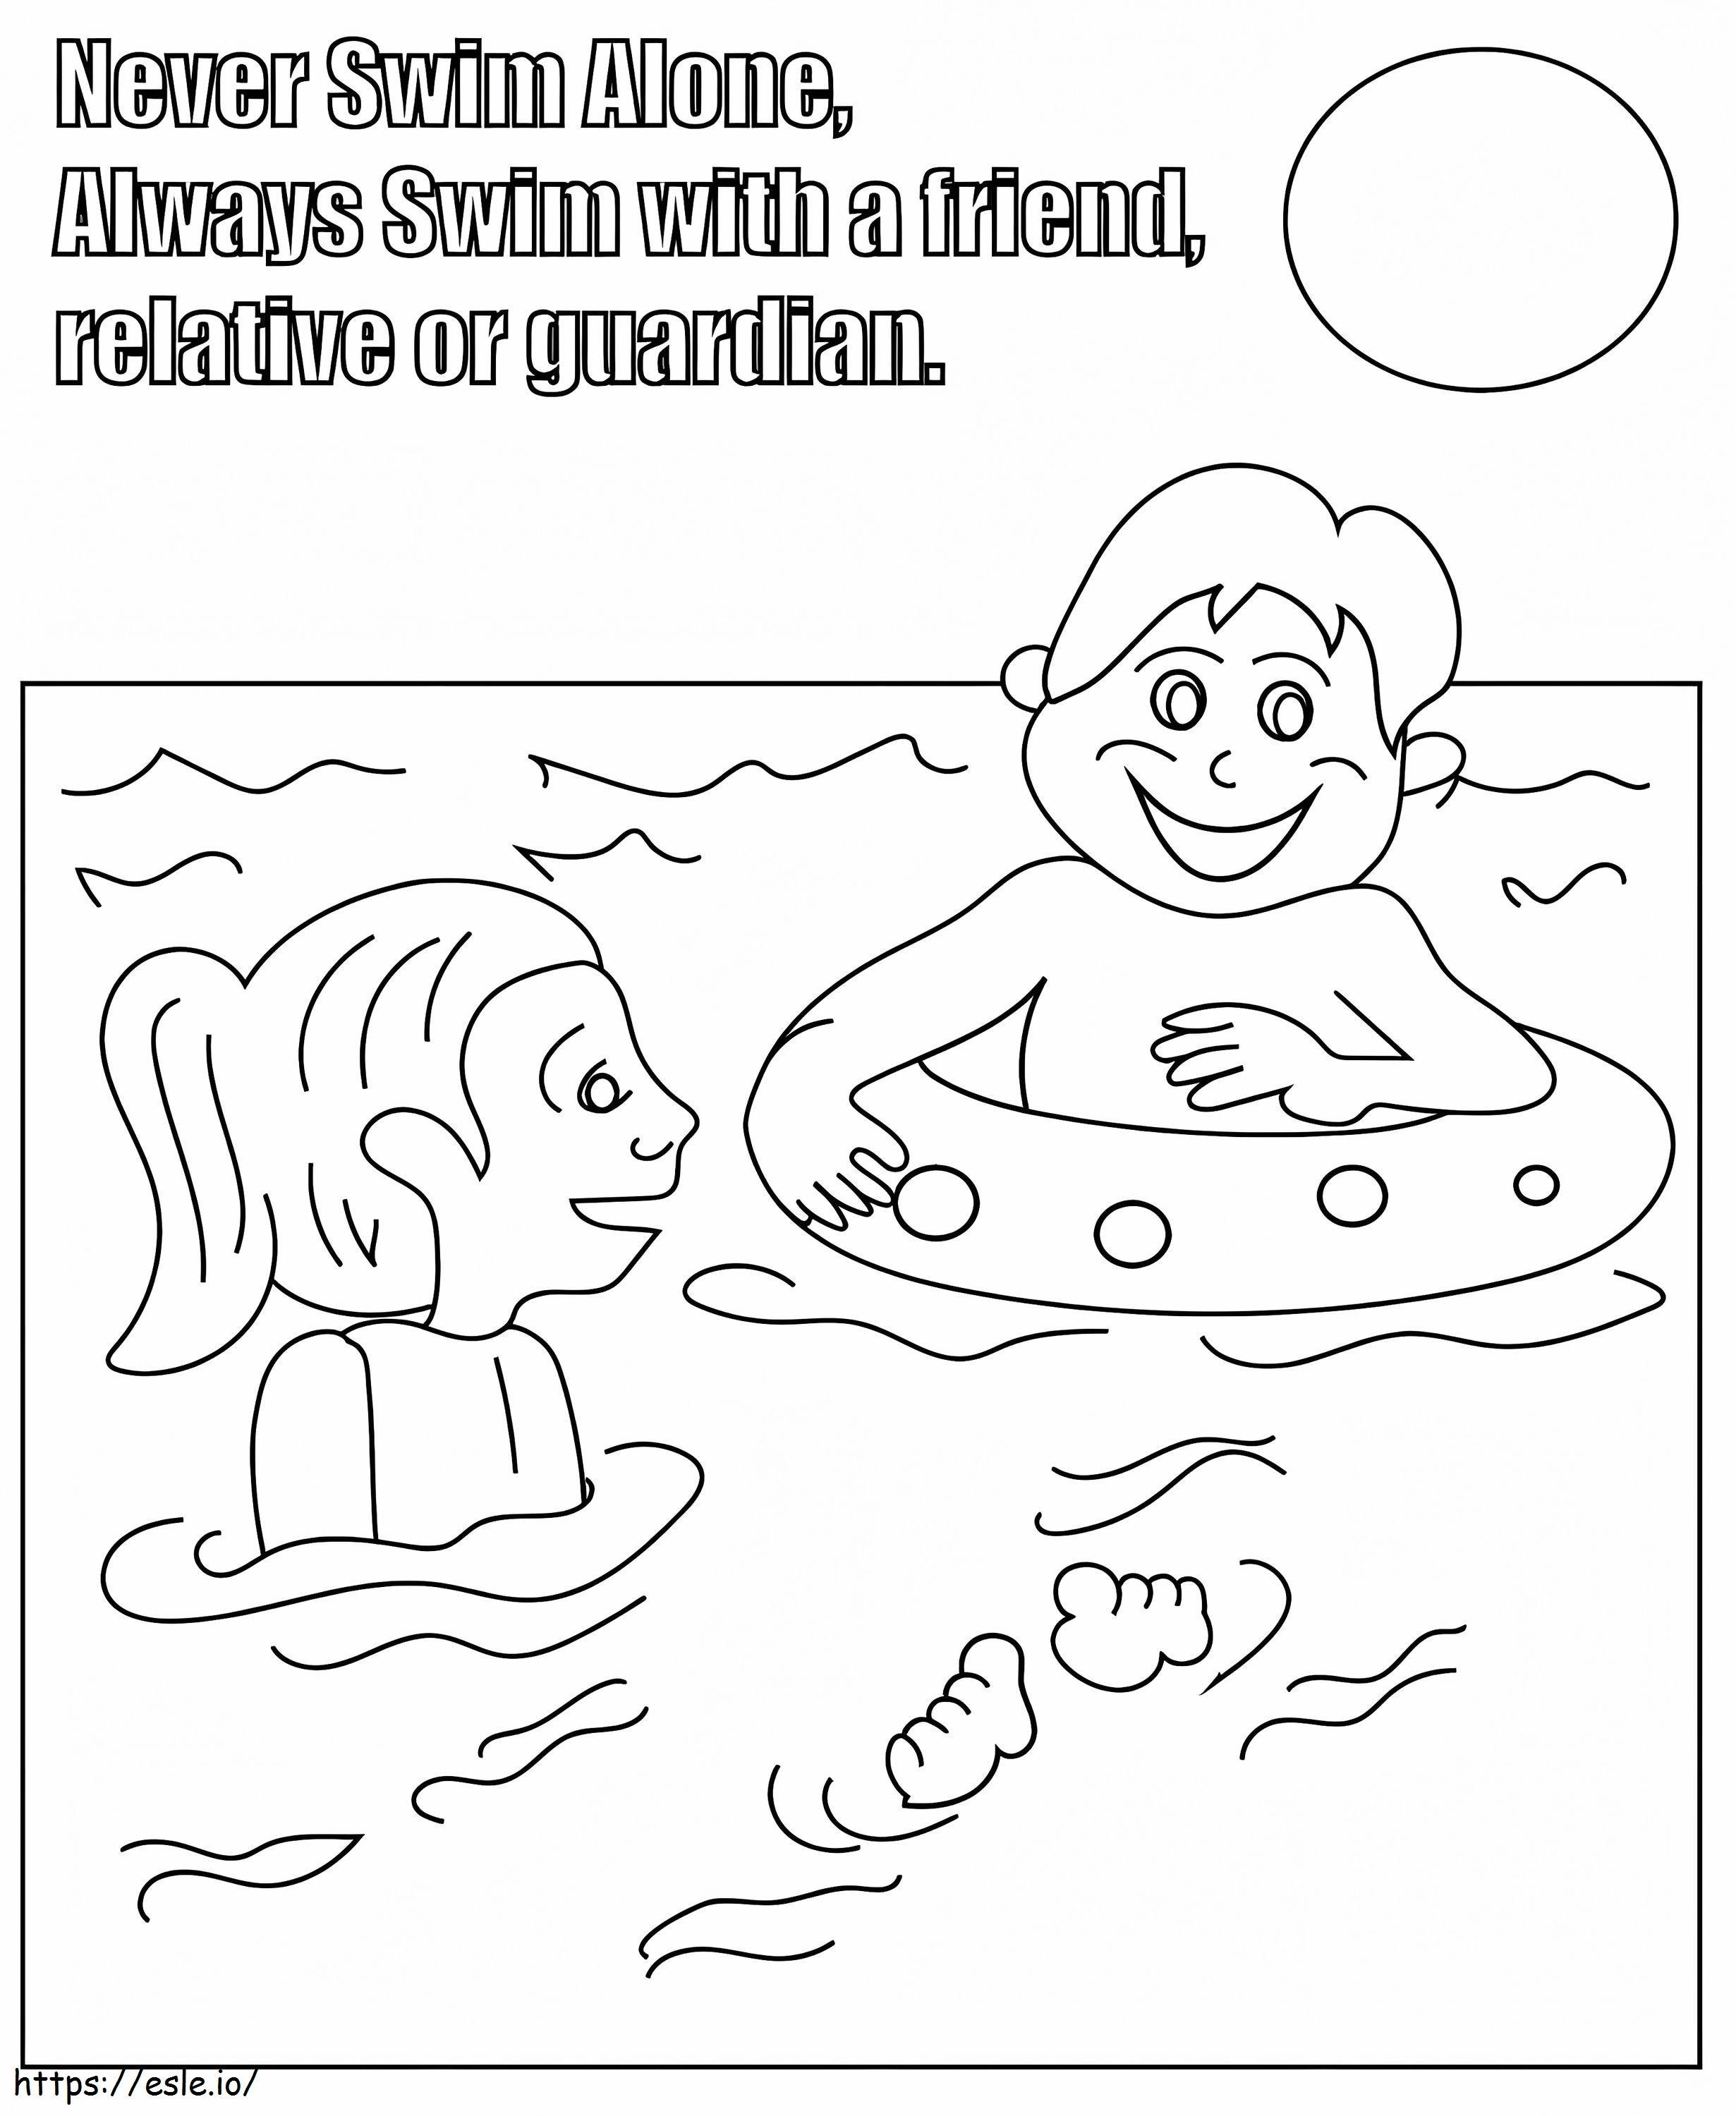 Printable Water Safety coloring page